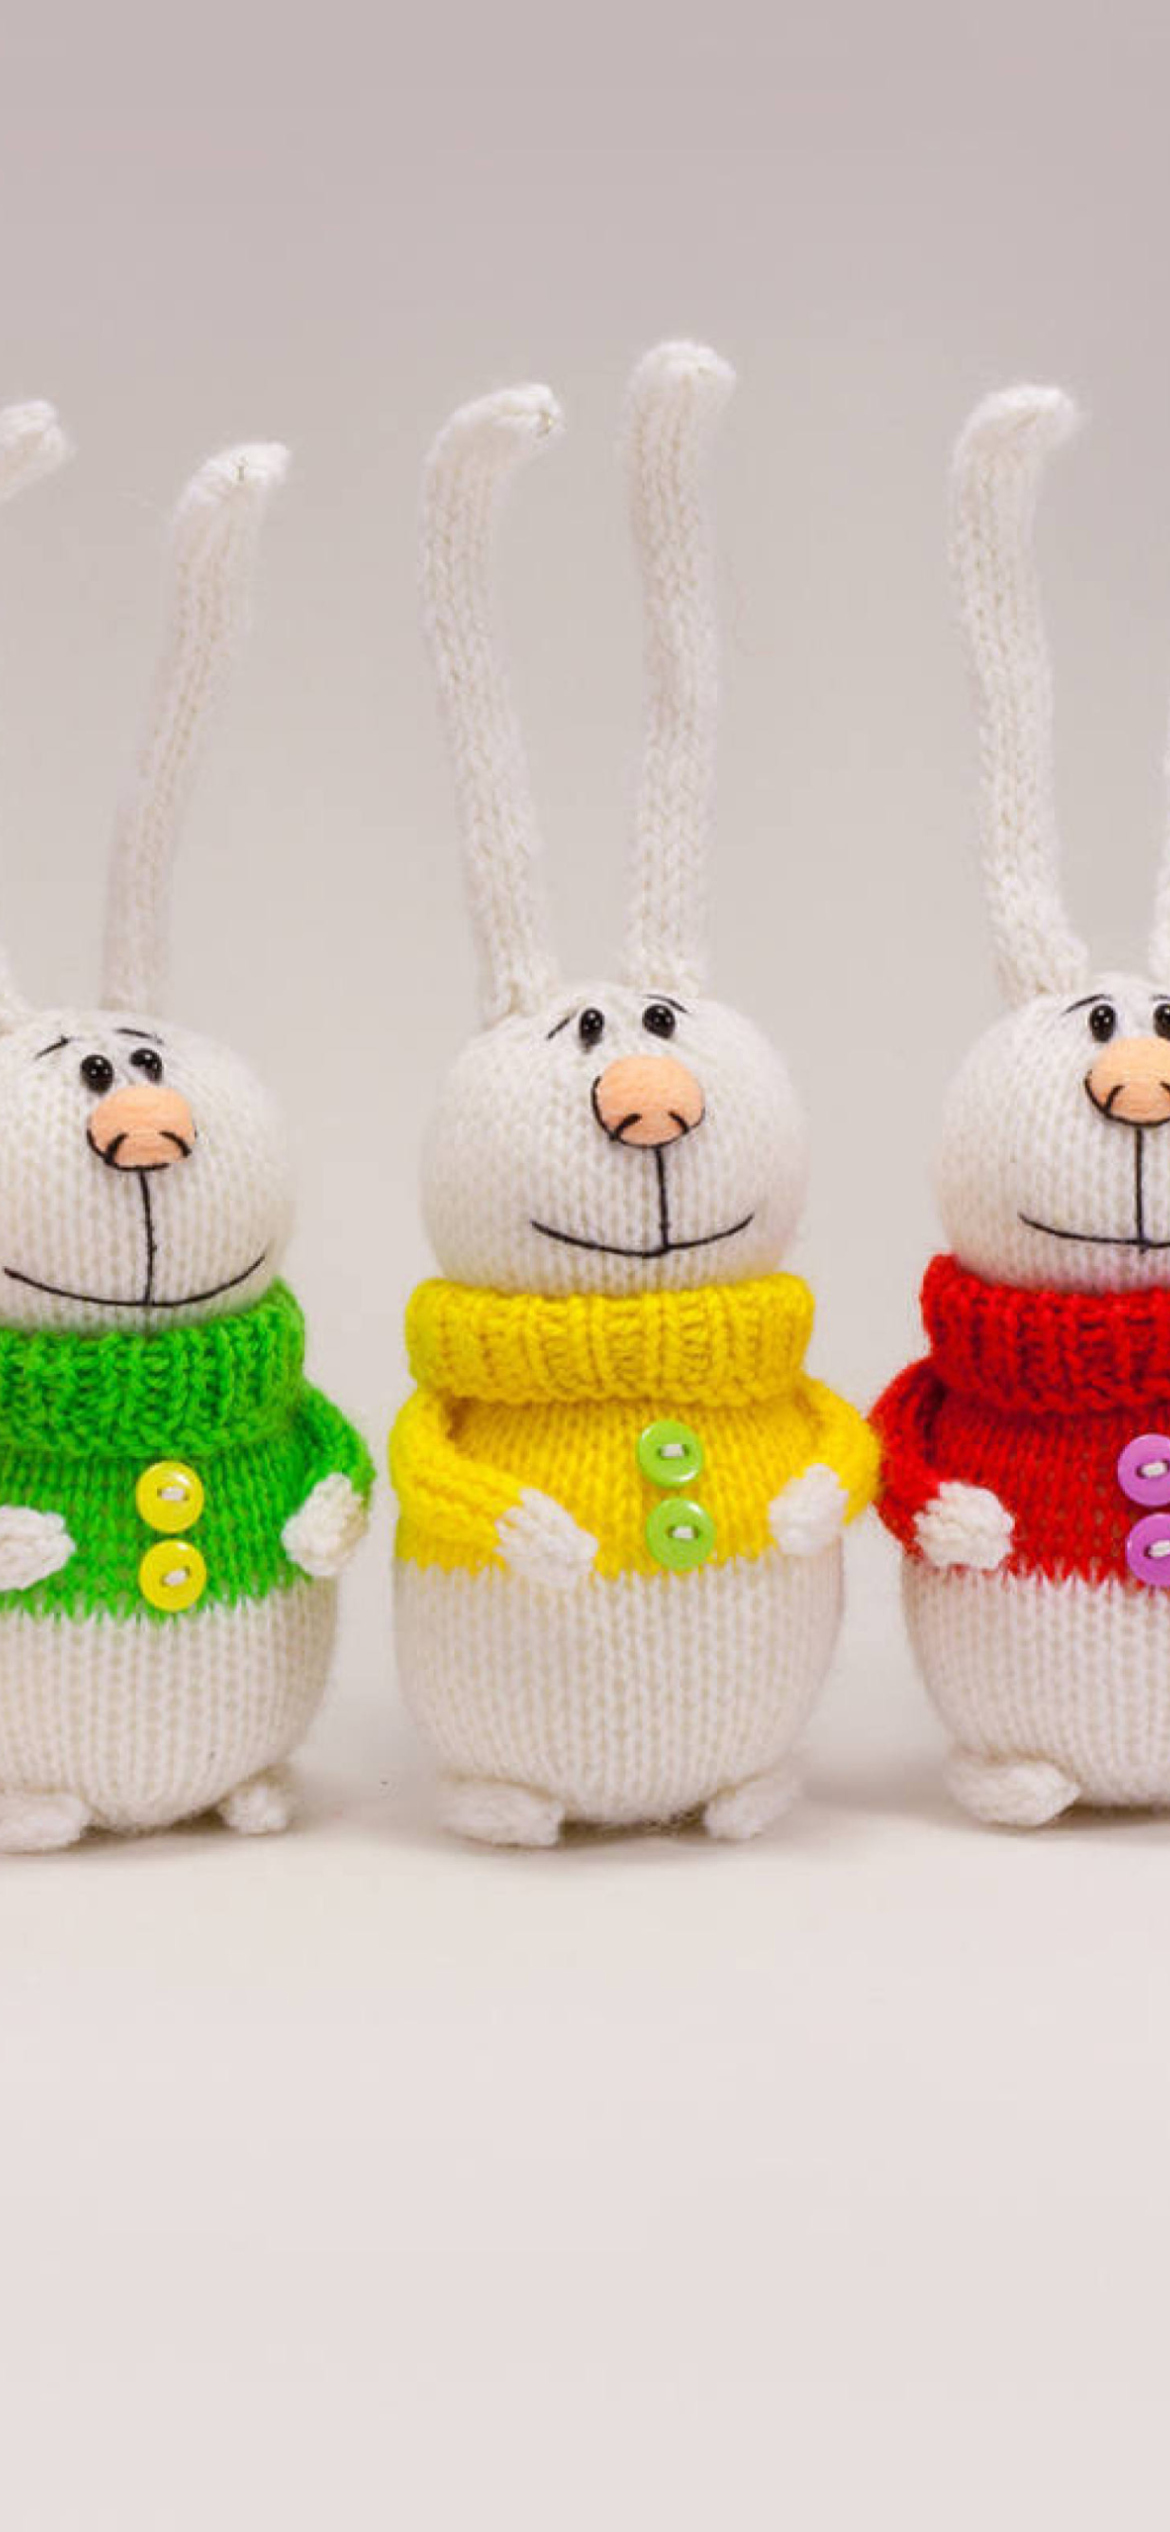 Funny Knitted Bunnies wallpaper 1170x2532